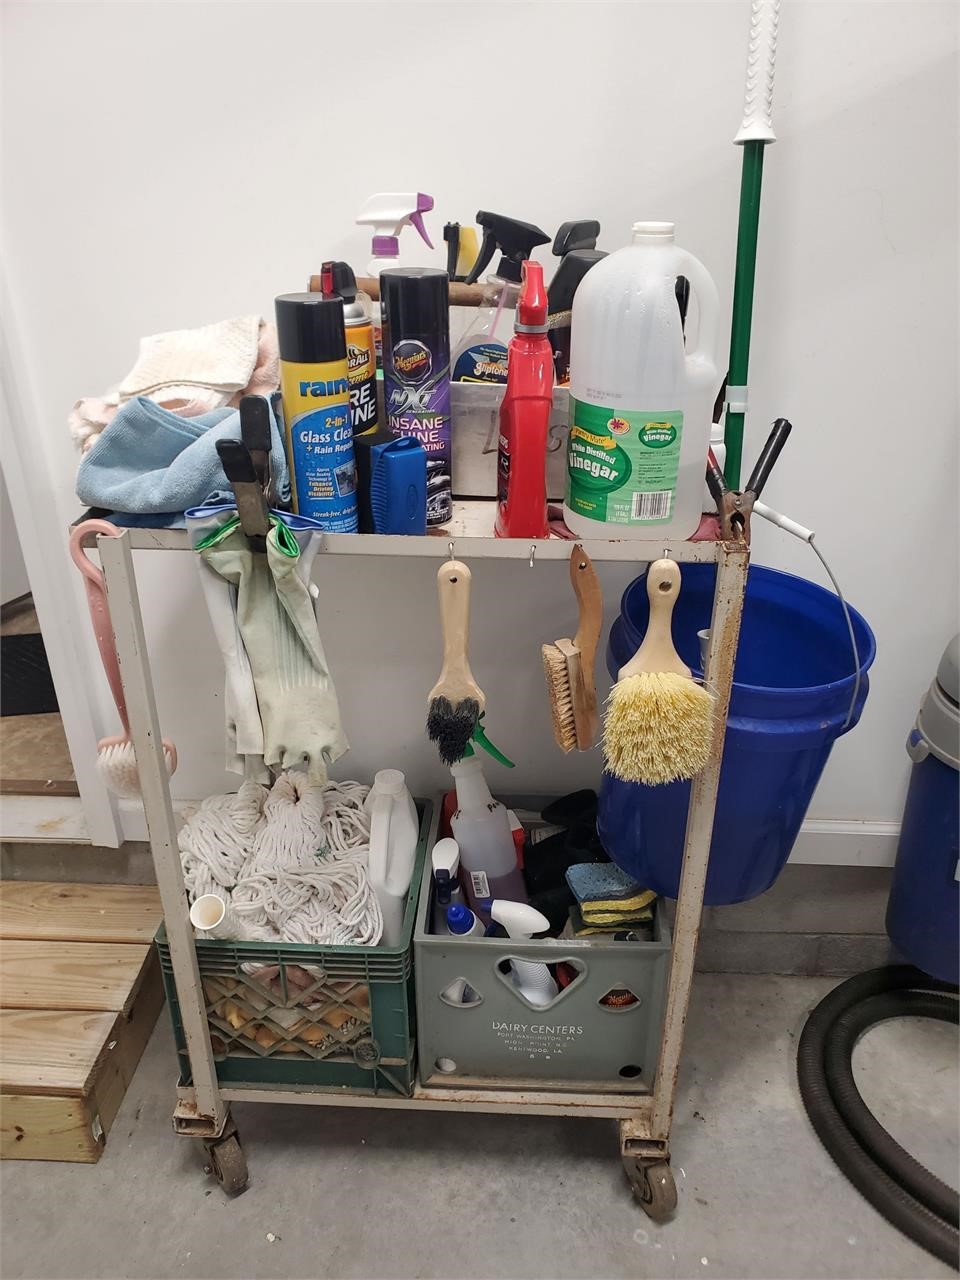 Cleaning supplies and rolling cart